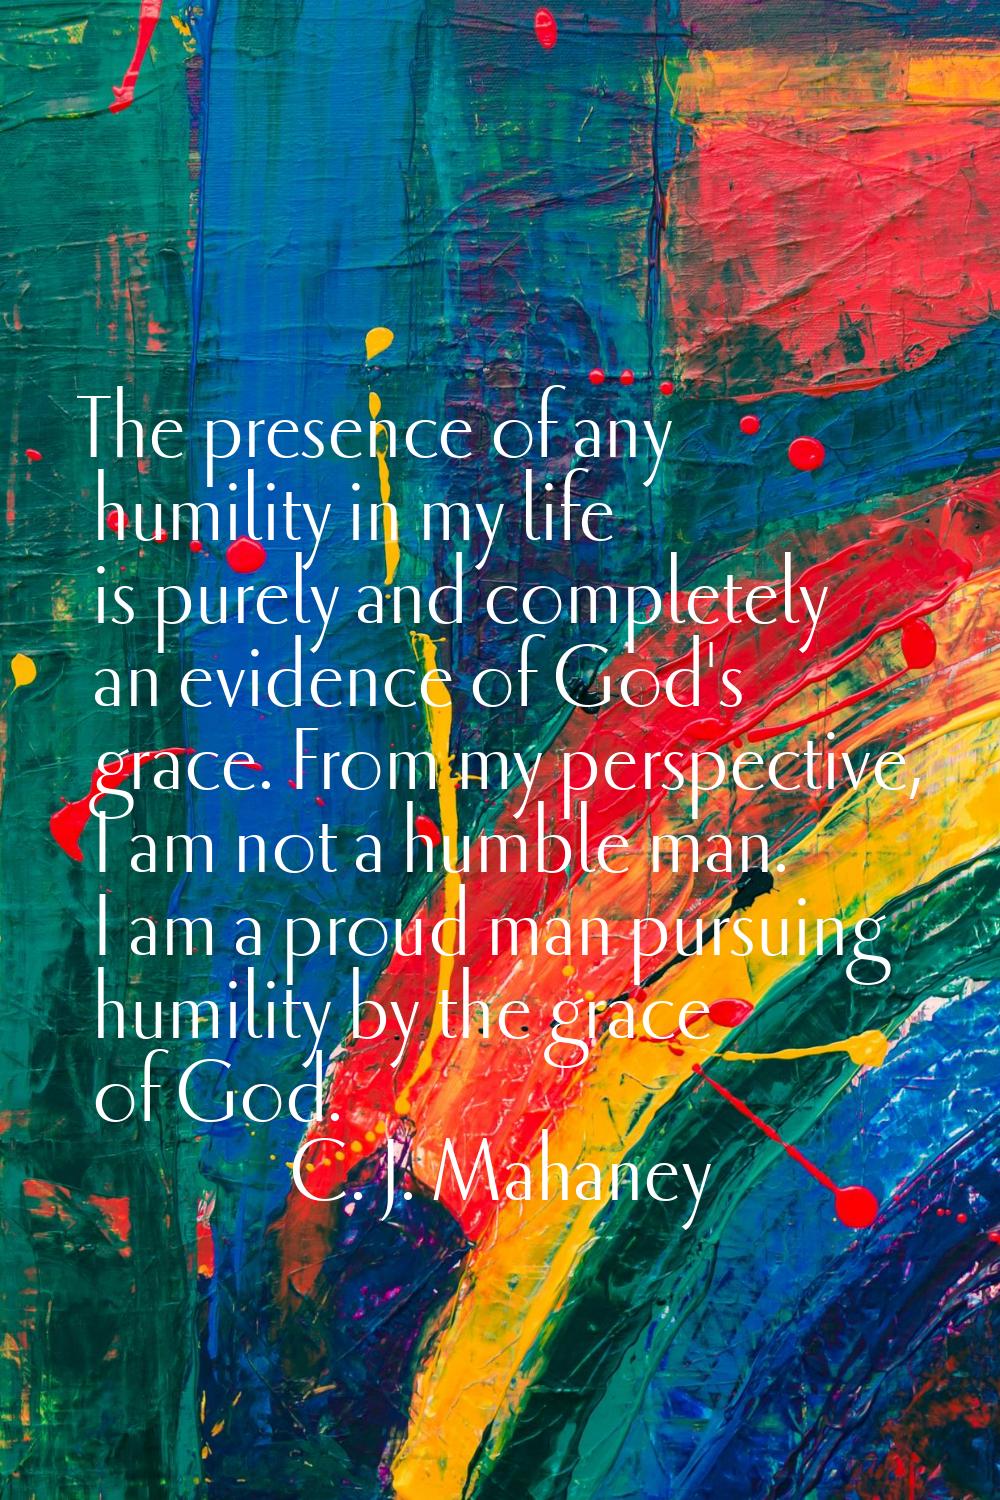 The presence of any humility in my life is purely and completely an evidence of God's grace. From m